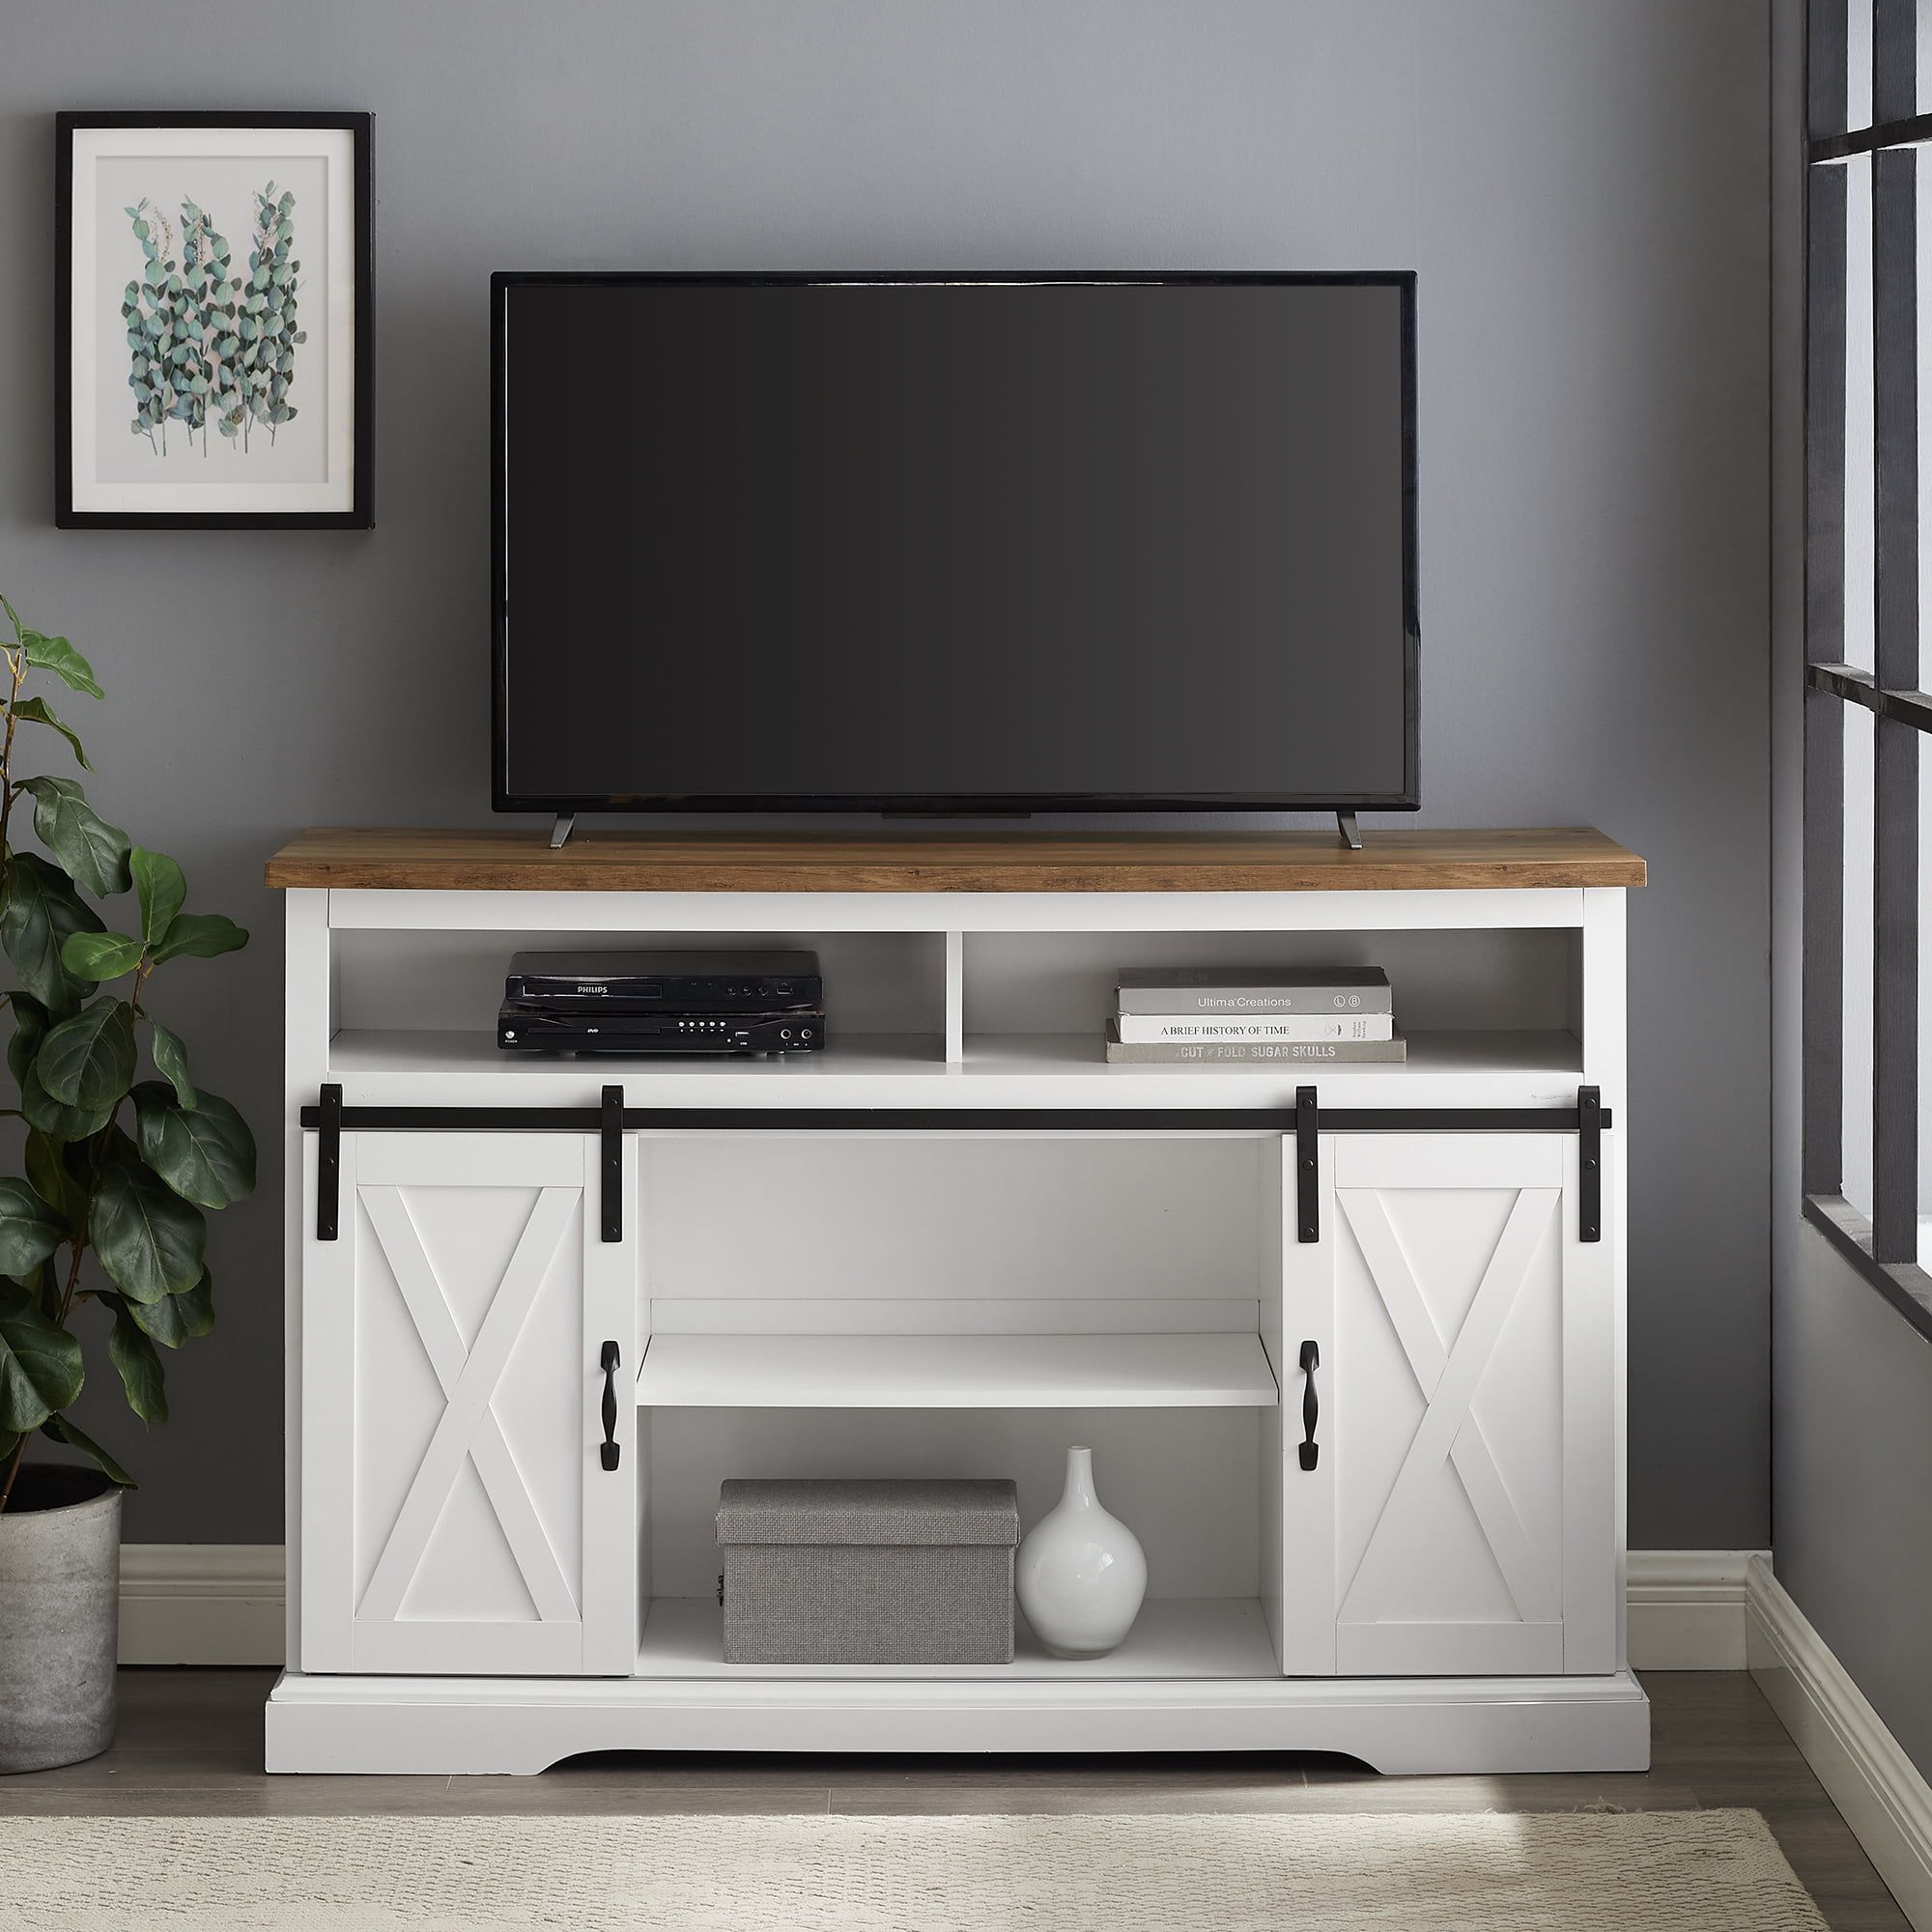 Manor Park Farmhouse Tv Stand For Tvs Up To 58", White/reclaimed Regarding Farmhouse Tv Stands (View 5 of 20)